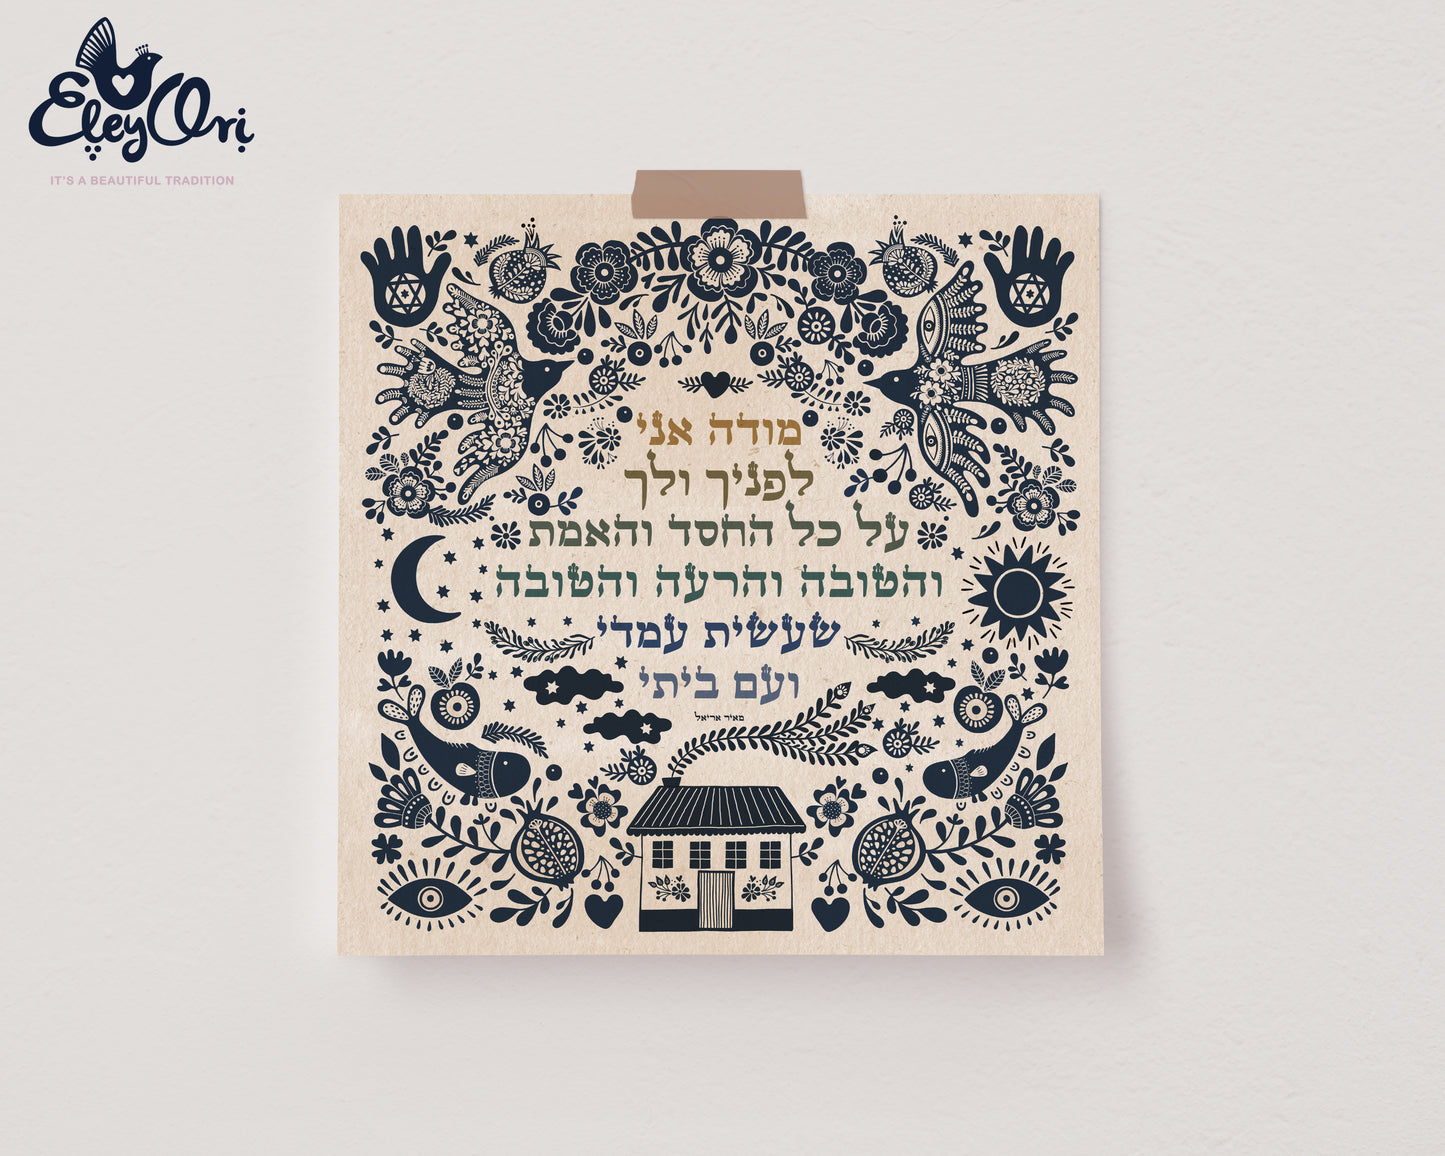 Modeh Ani - Illustrated lyrics to the song by Meir Ariel